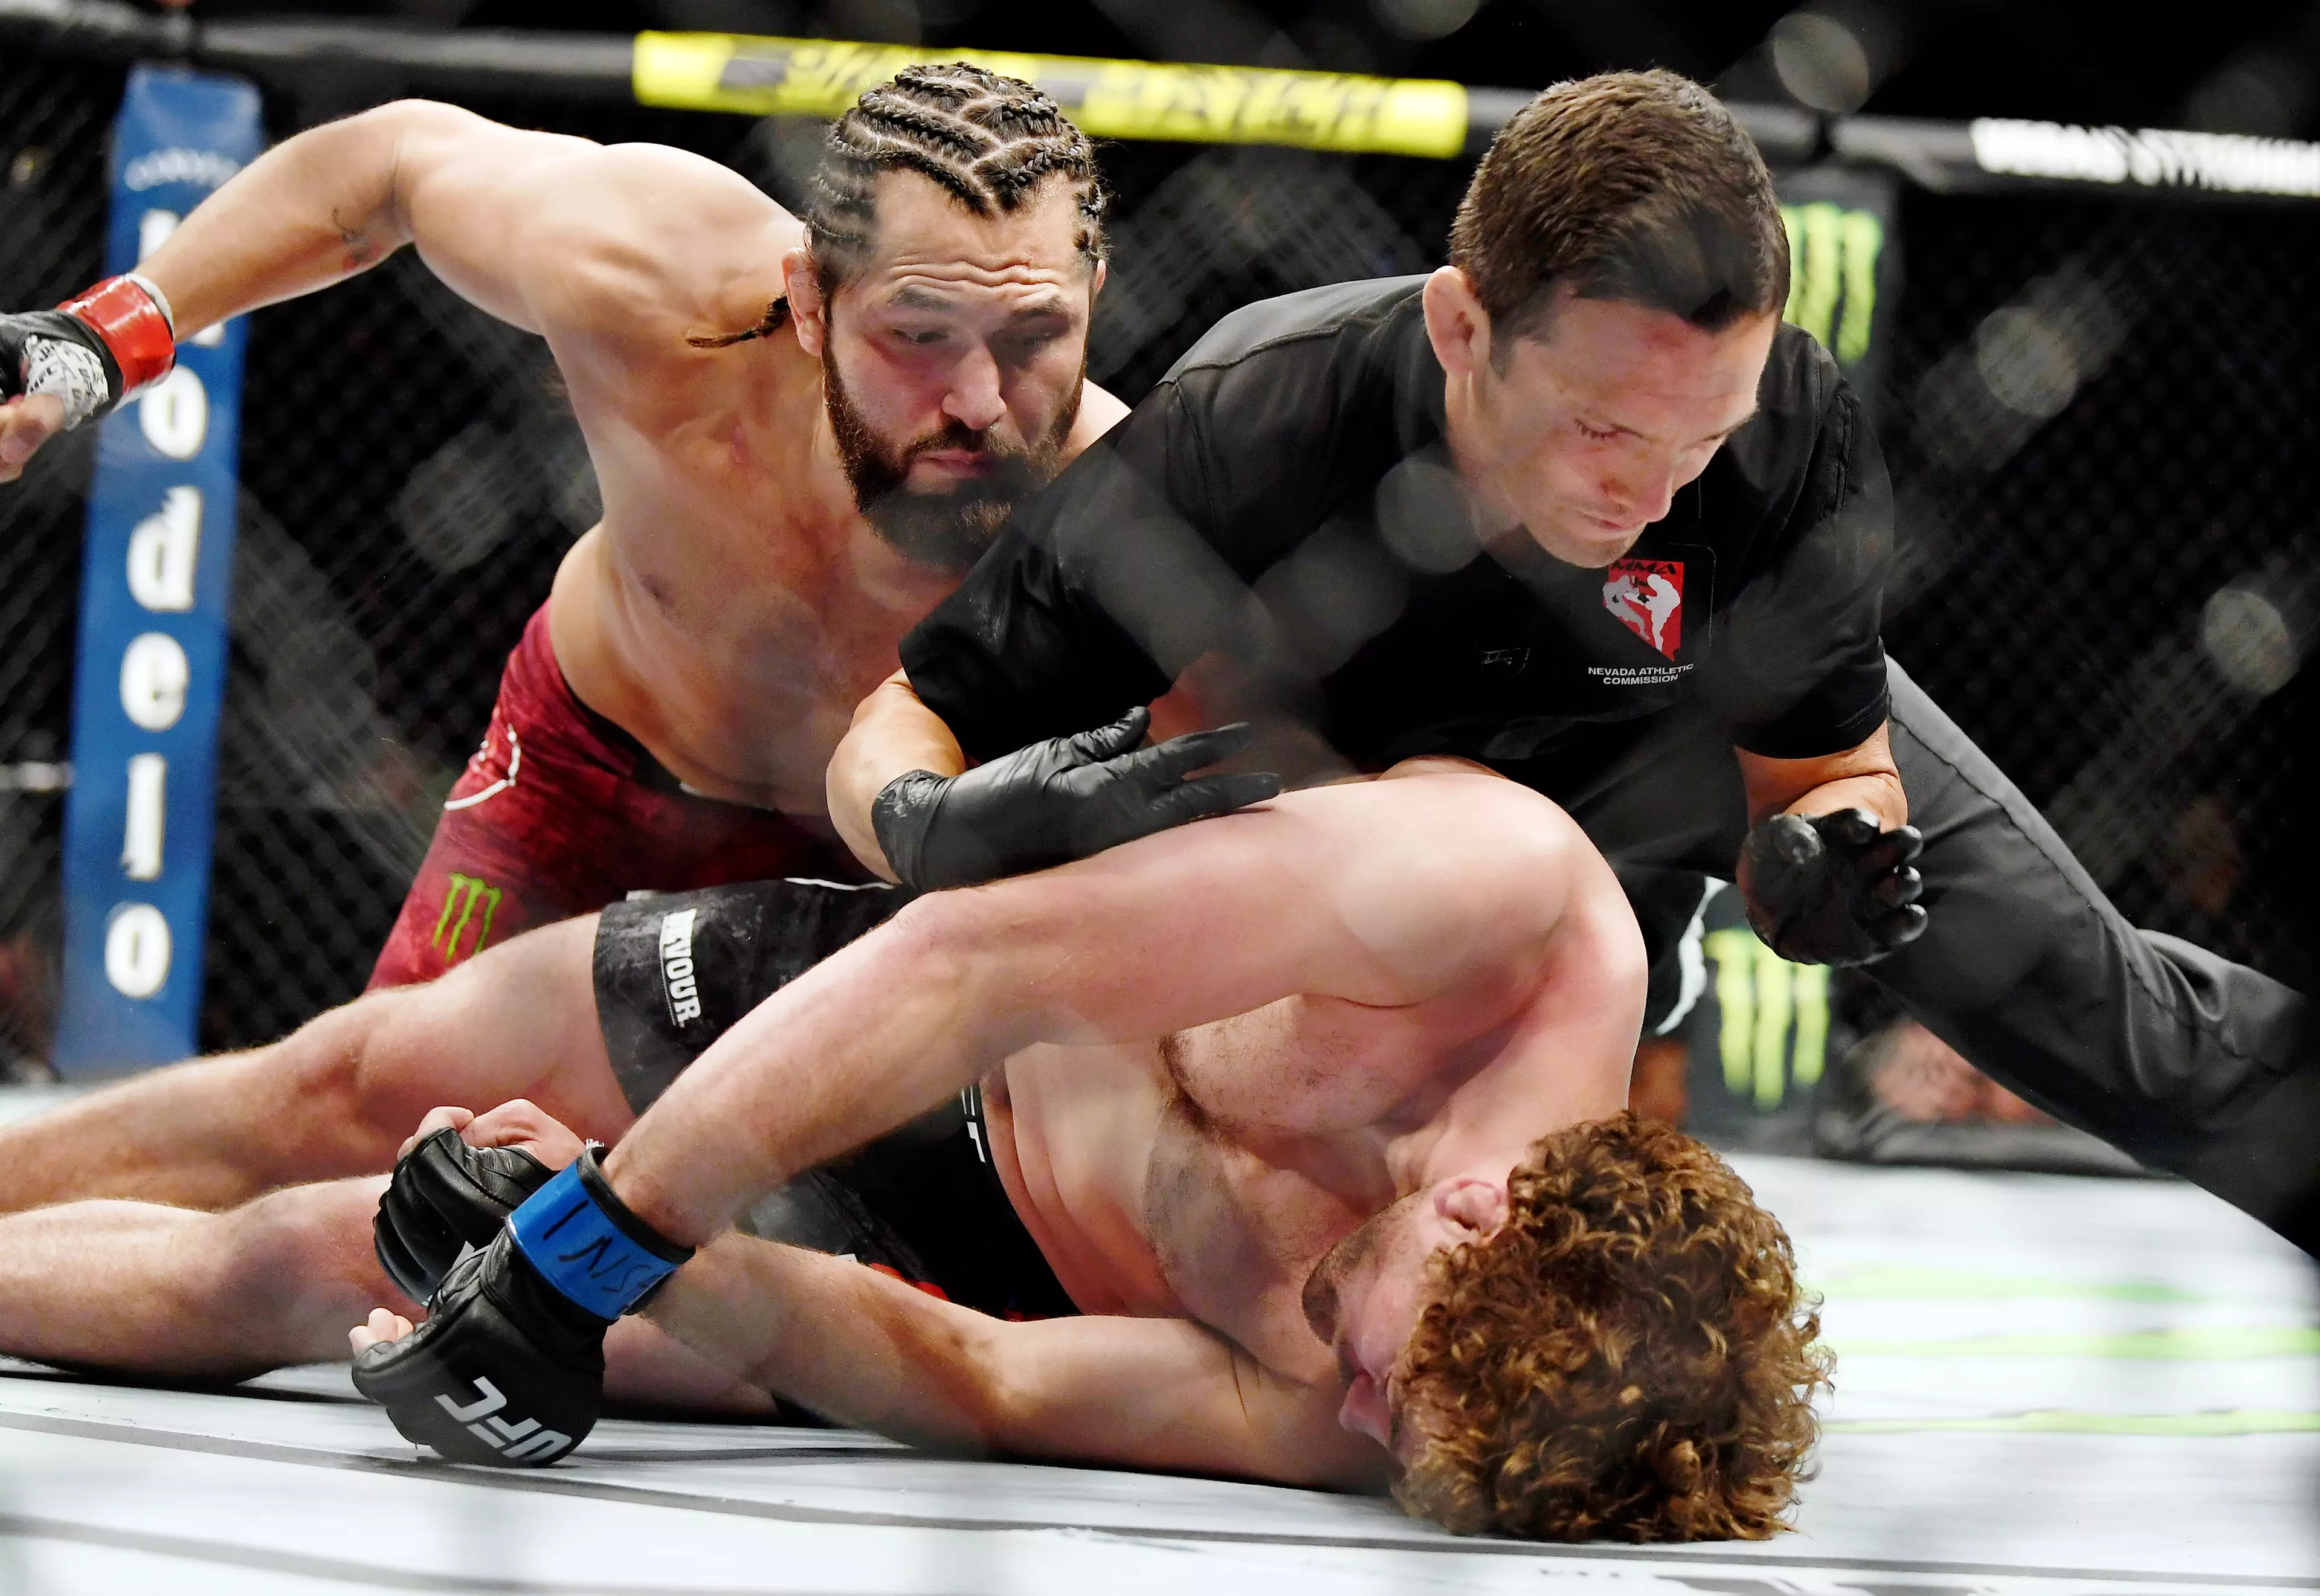 Askren was knocked out by Jorge Masvidal in the fastest ever UFC KO.